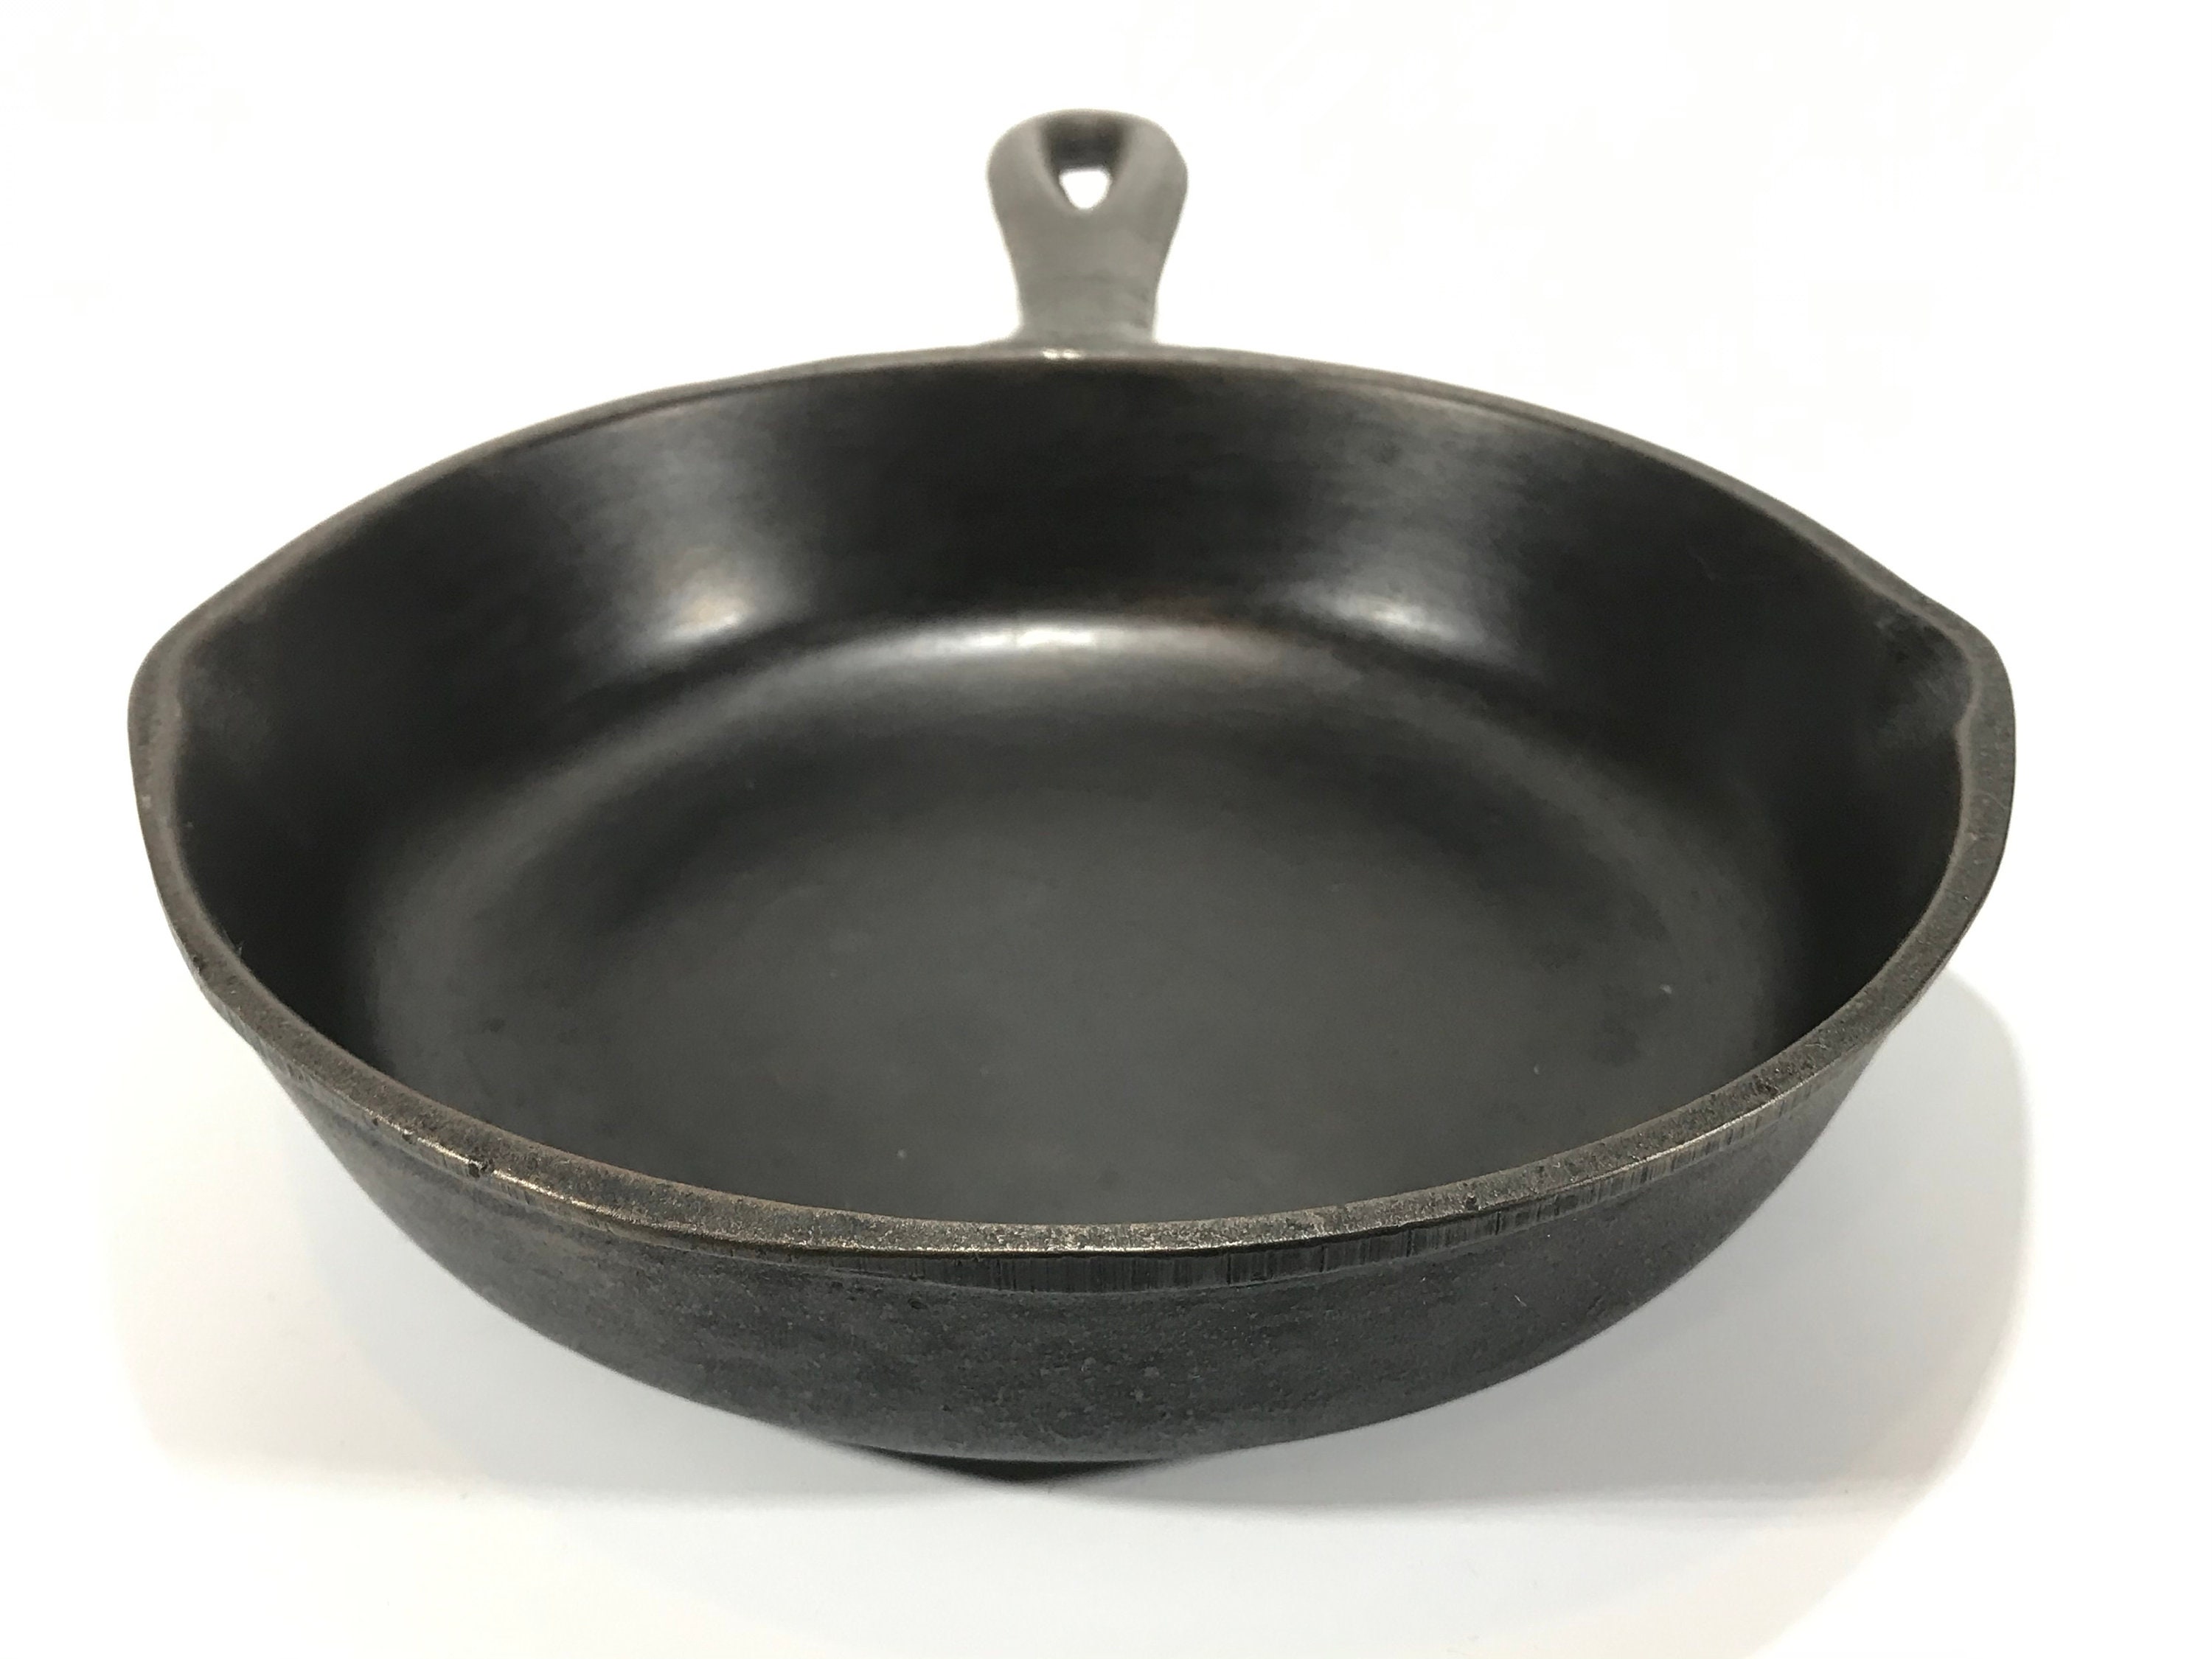 No. 3 BSR Cast Iron Skillet, Small 6 5/8-inch Diameter, 3 With Heat Ring,  Century Series, 3 Restored Frying Baking Camping Pan Cookware 